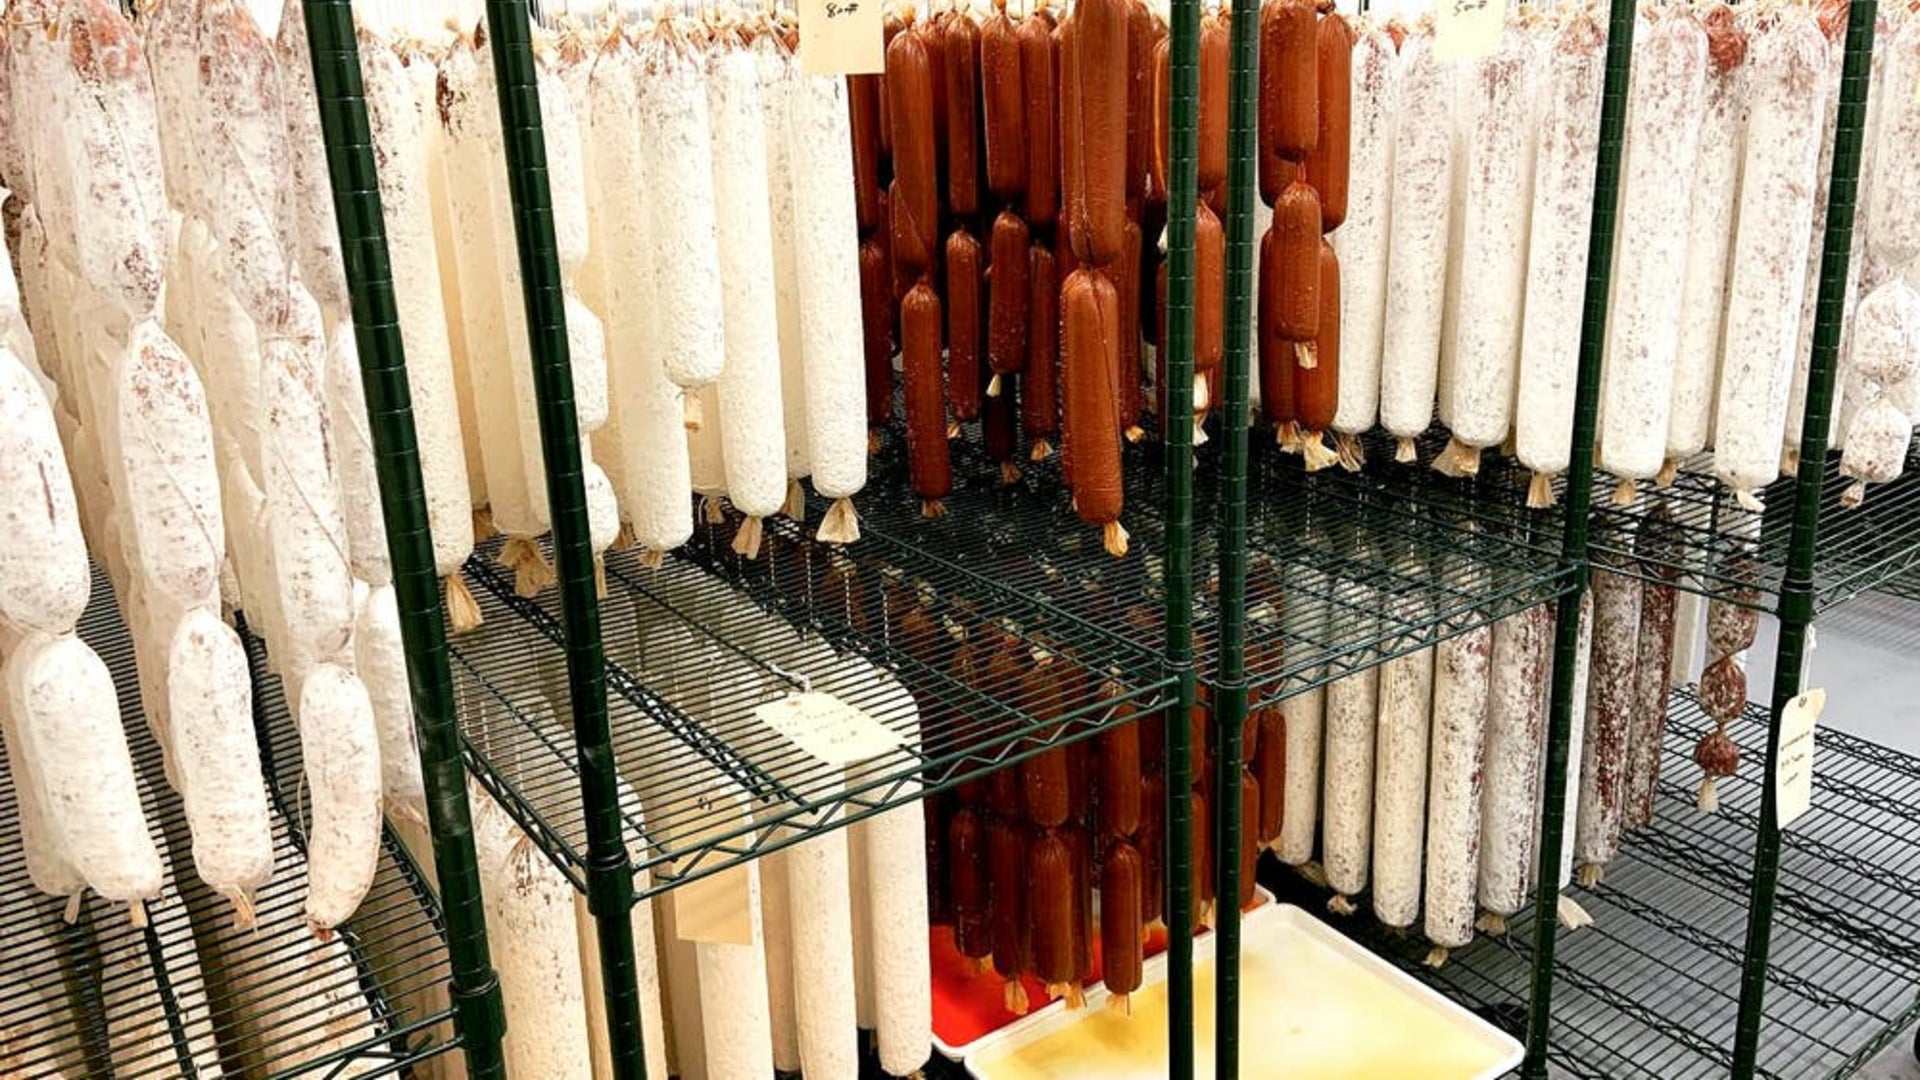 A cured meat drying room with 'Nduja and different hard salami hanging during the meats drying process.